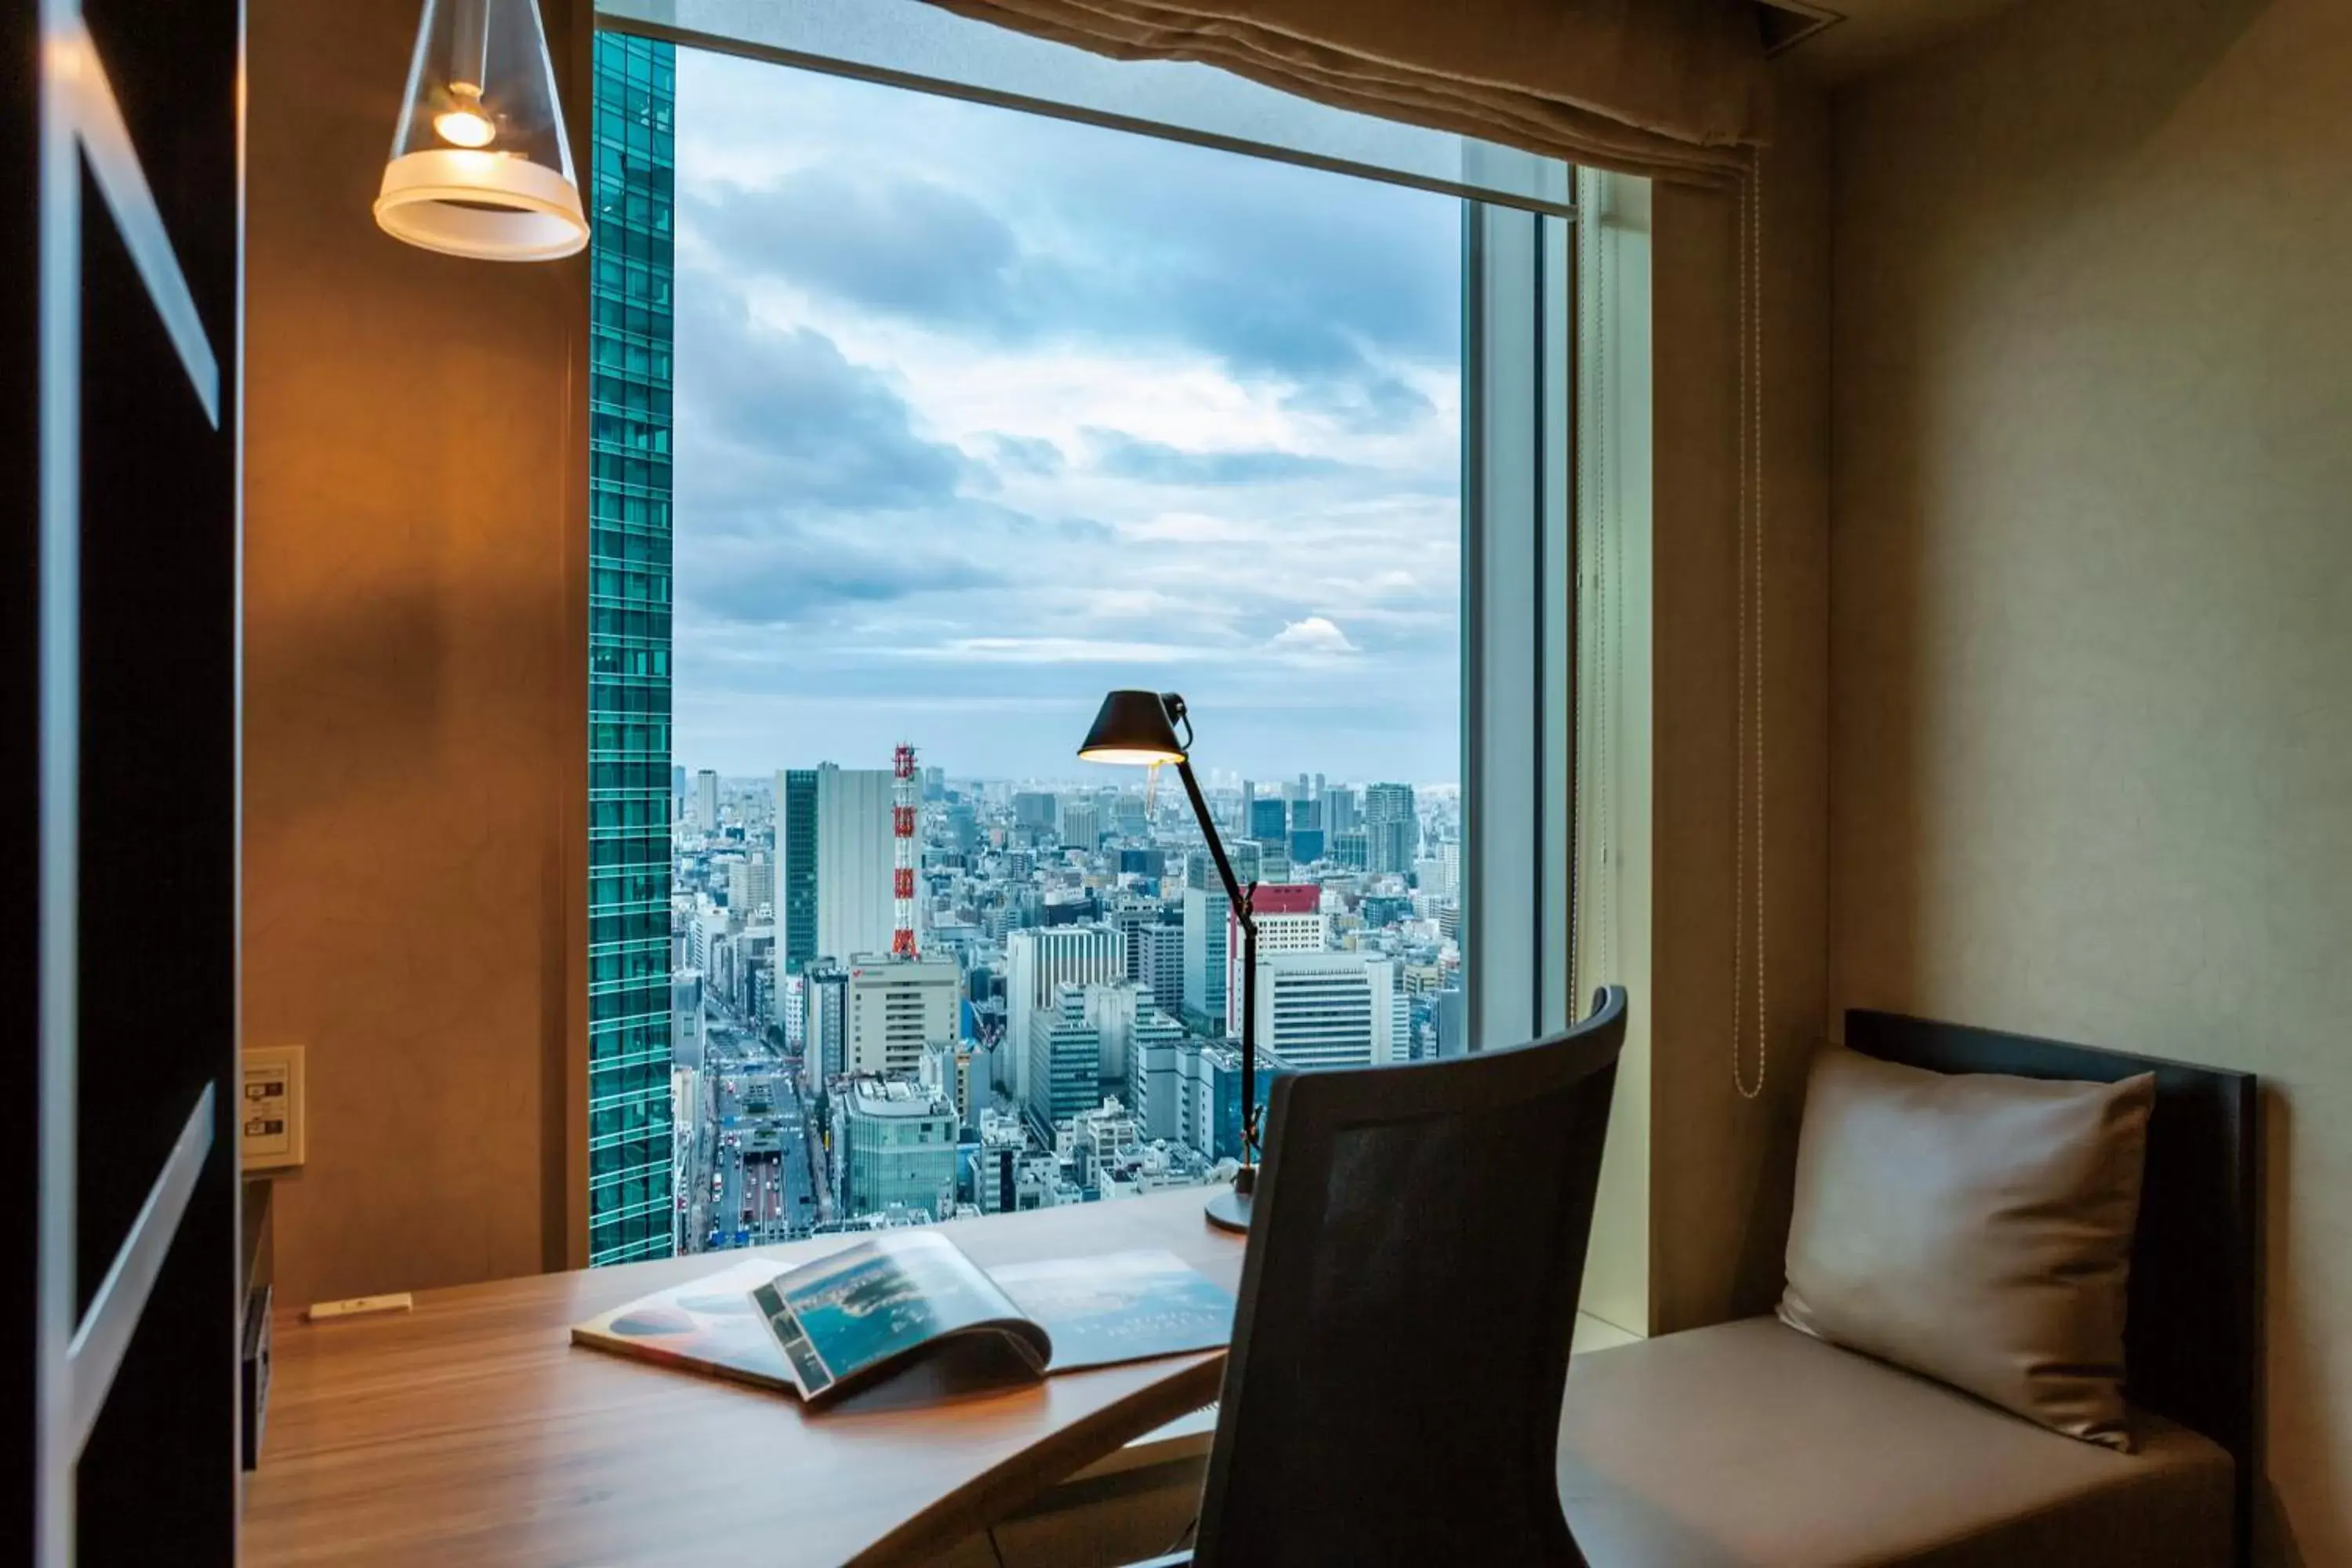 View (from property/room) in Royal Park Hotel The Shiodome, Tokyo